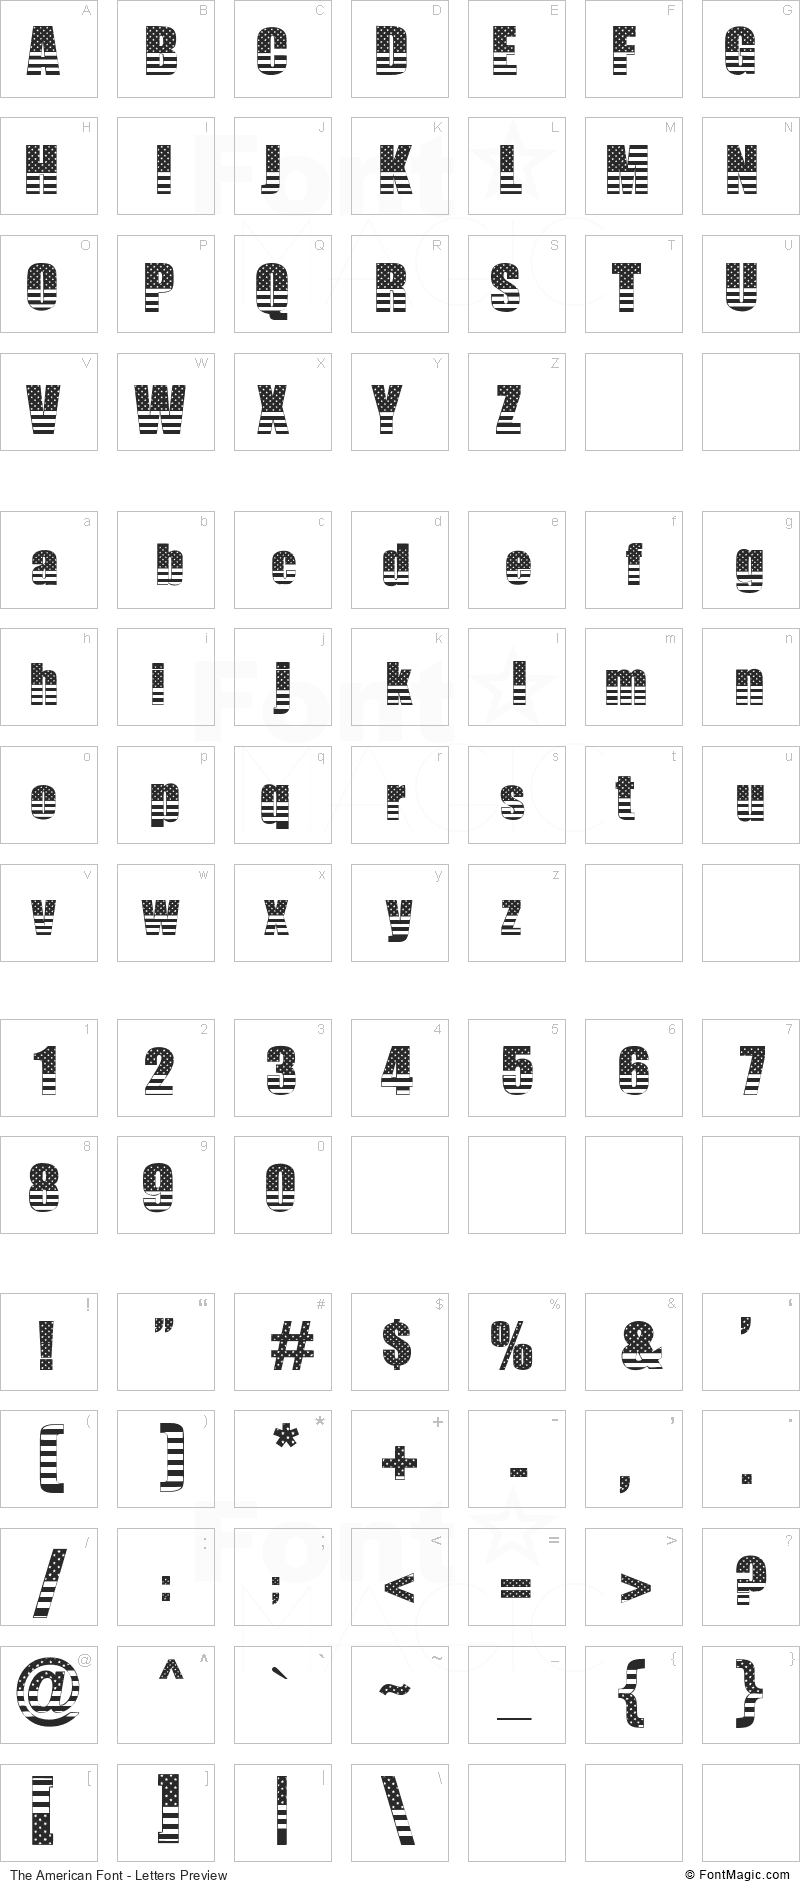 The American Font - All Latters Preview Chart